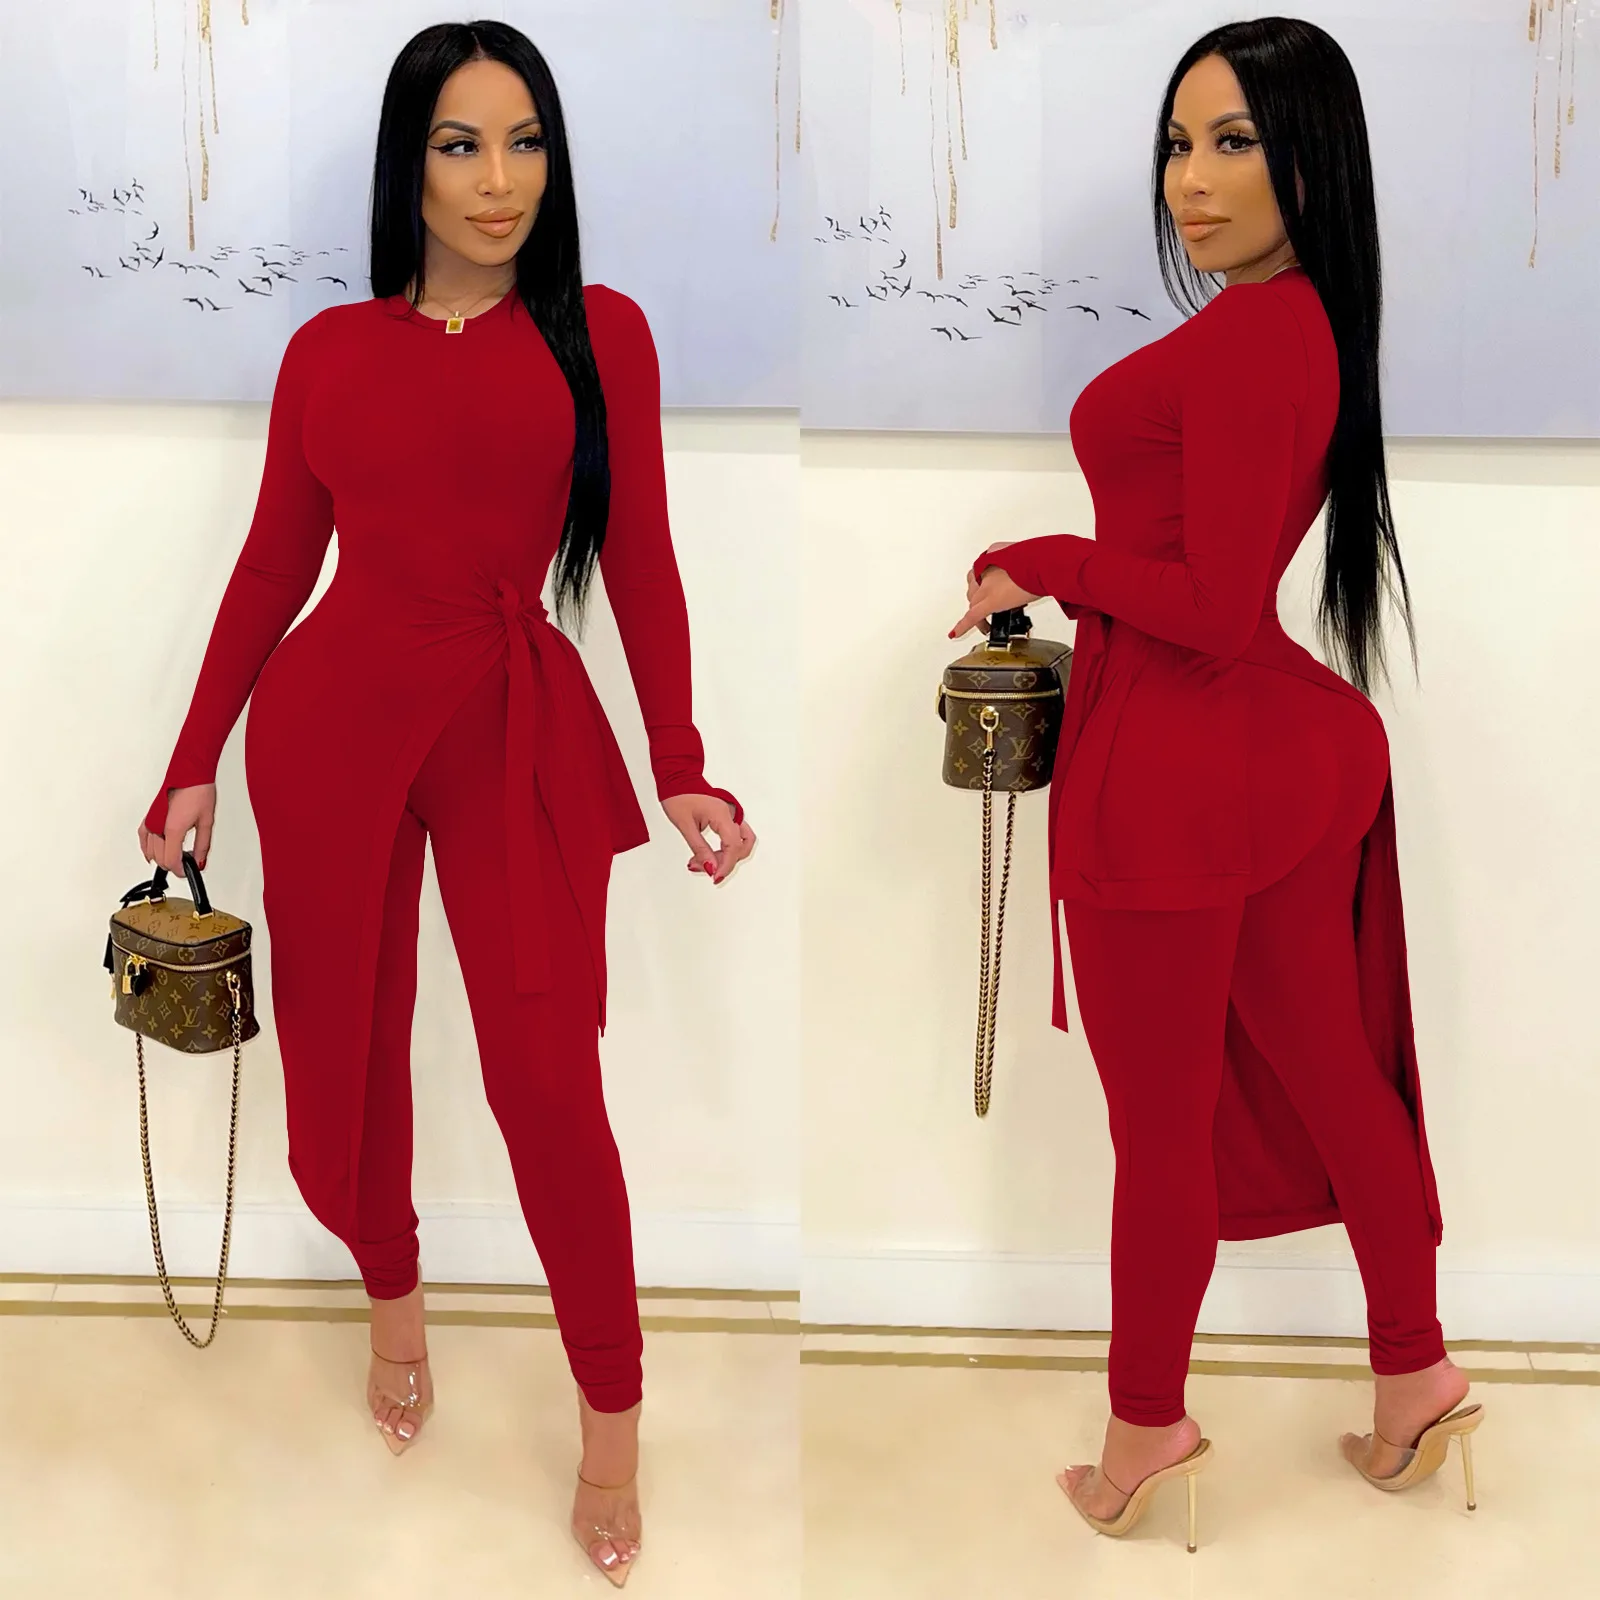 

Casual Women Tracksuit Two Piece Set Bandage Shirt + Long Pants Solid Color Sportsuit Matching Set Clothes For Women Outfit